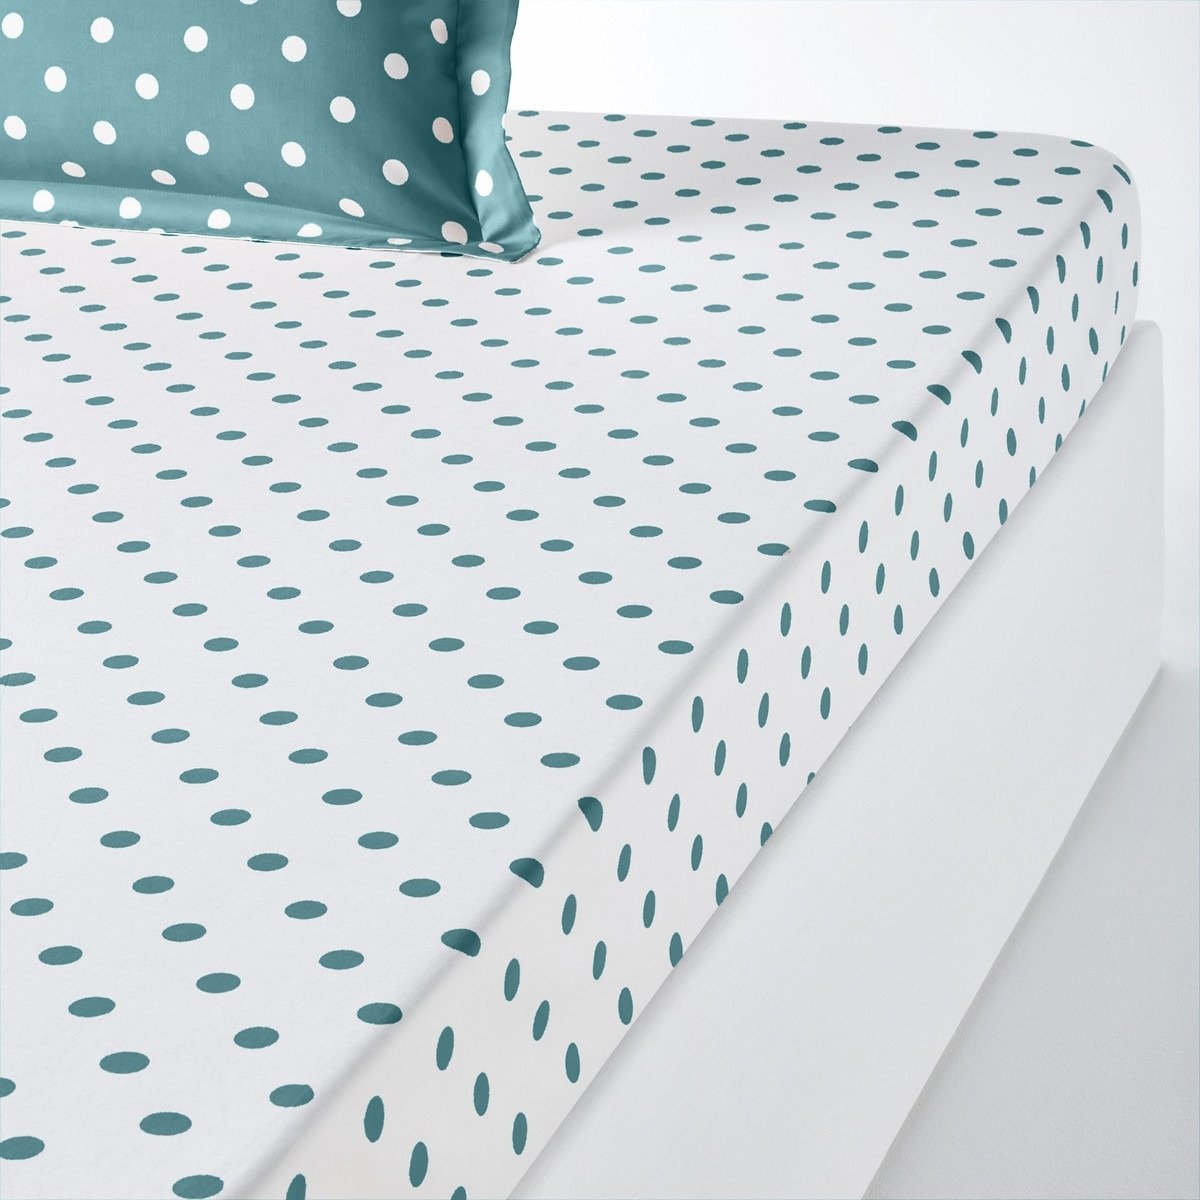 Clarisse Polka Dot 100% Cotton Fitted Sheet - image 1